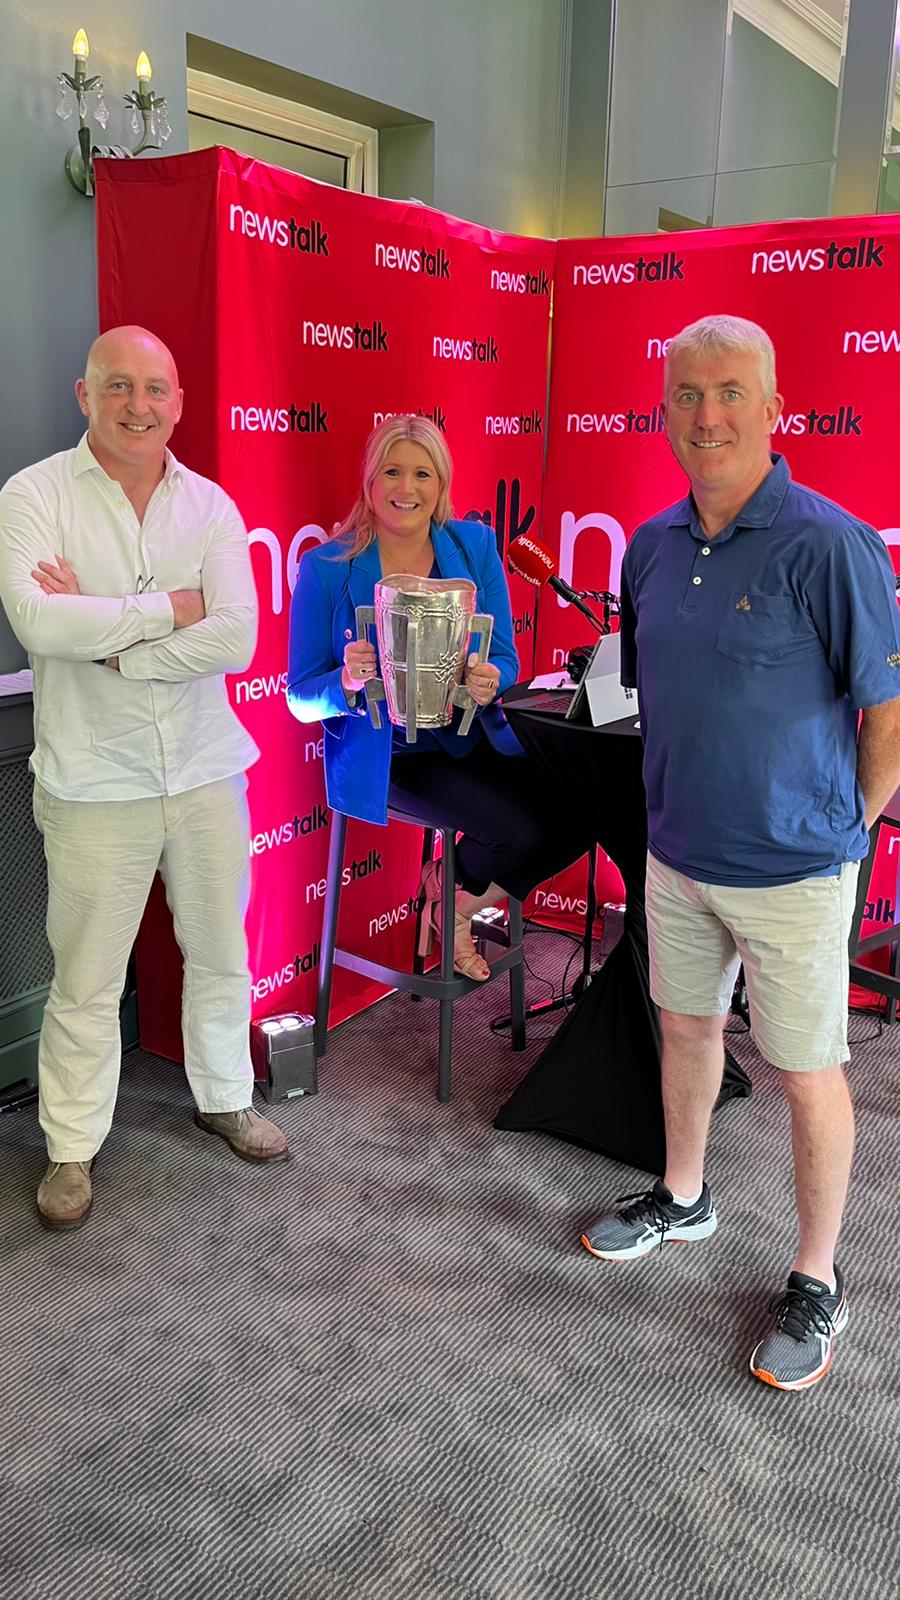 Keith Wood and john Kiely with Andrea Gilligan in Limerick for the Newstalk Summer Tour. Image: Newstalk